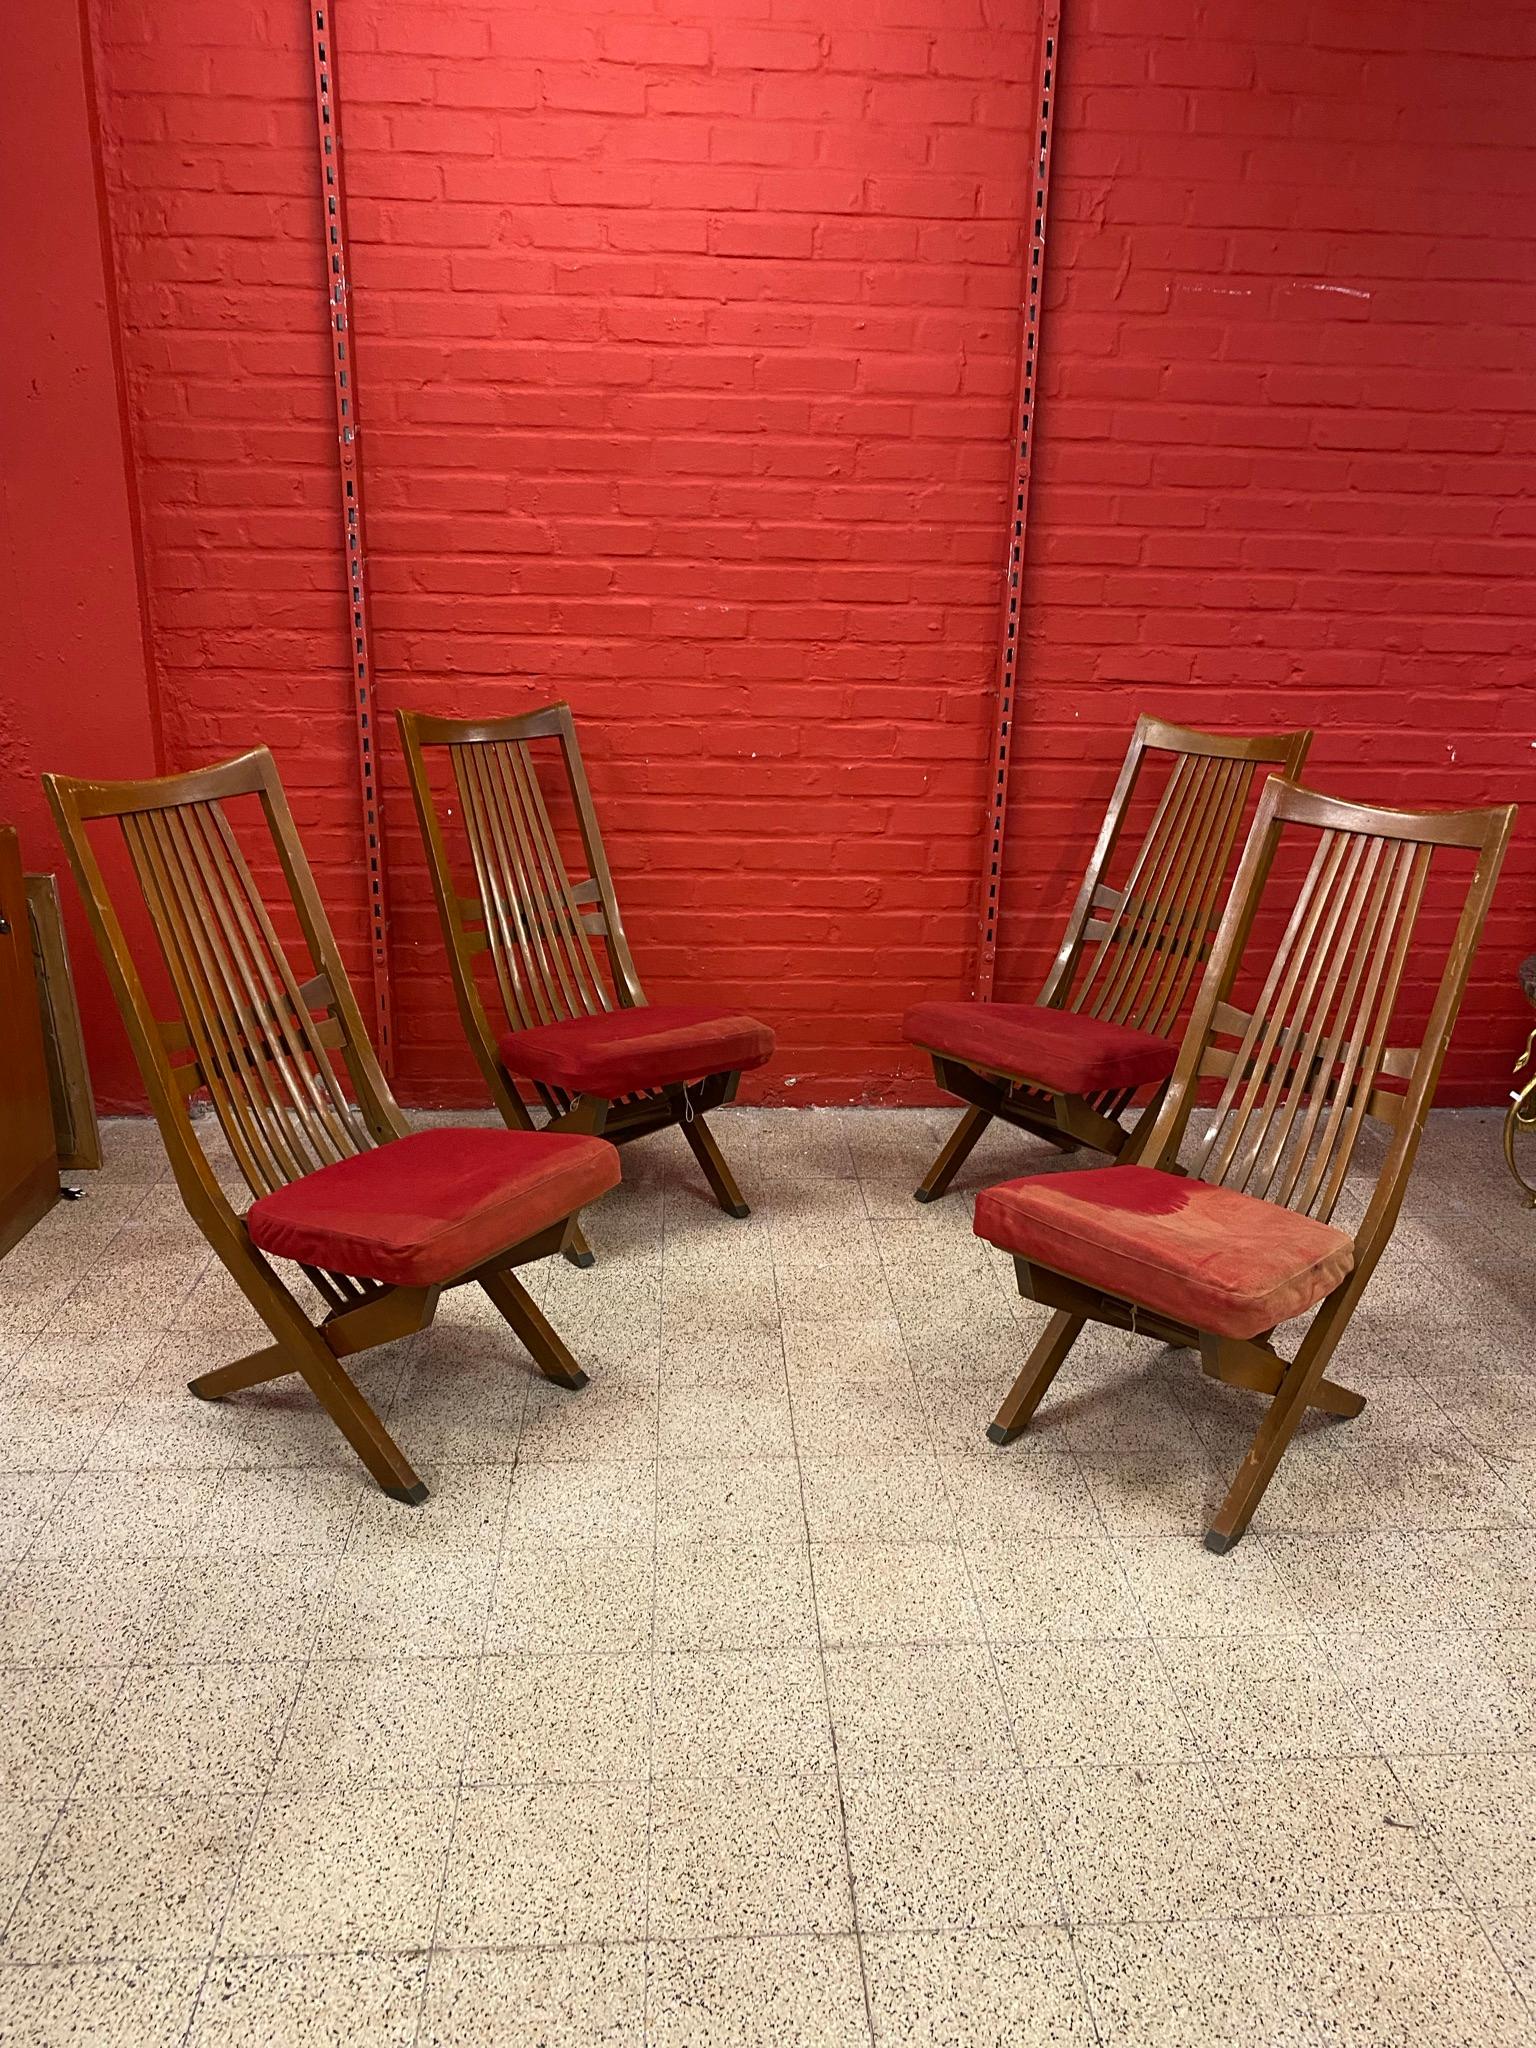 Late 20th Century 4 Vintage Chairs with 3 Positions High Chair, Fireside Chair, Lounge Chair For Sale